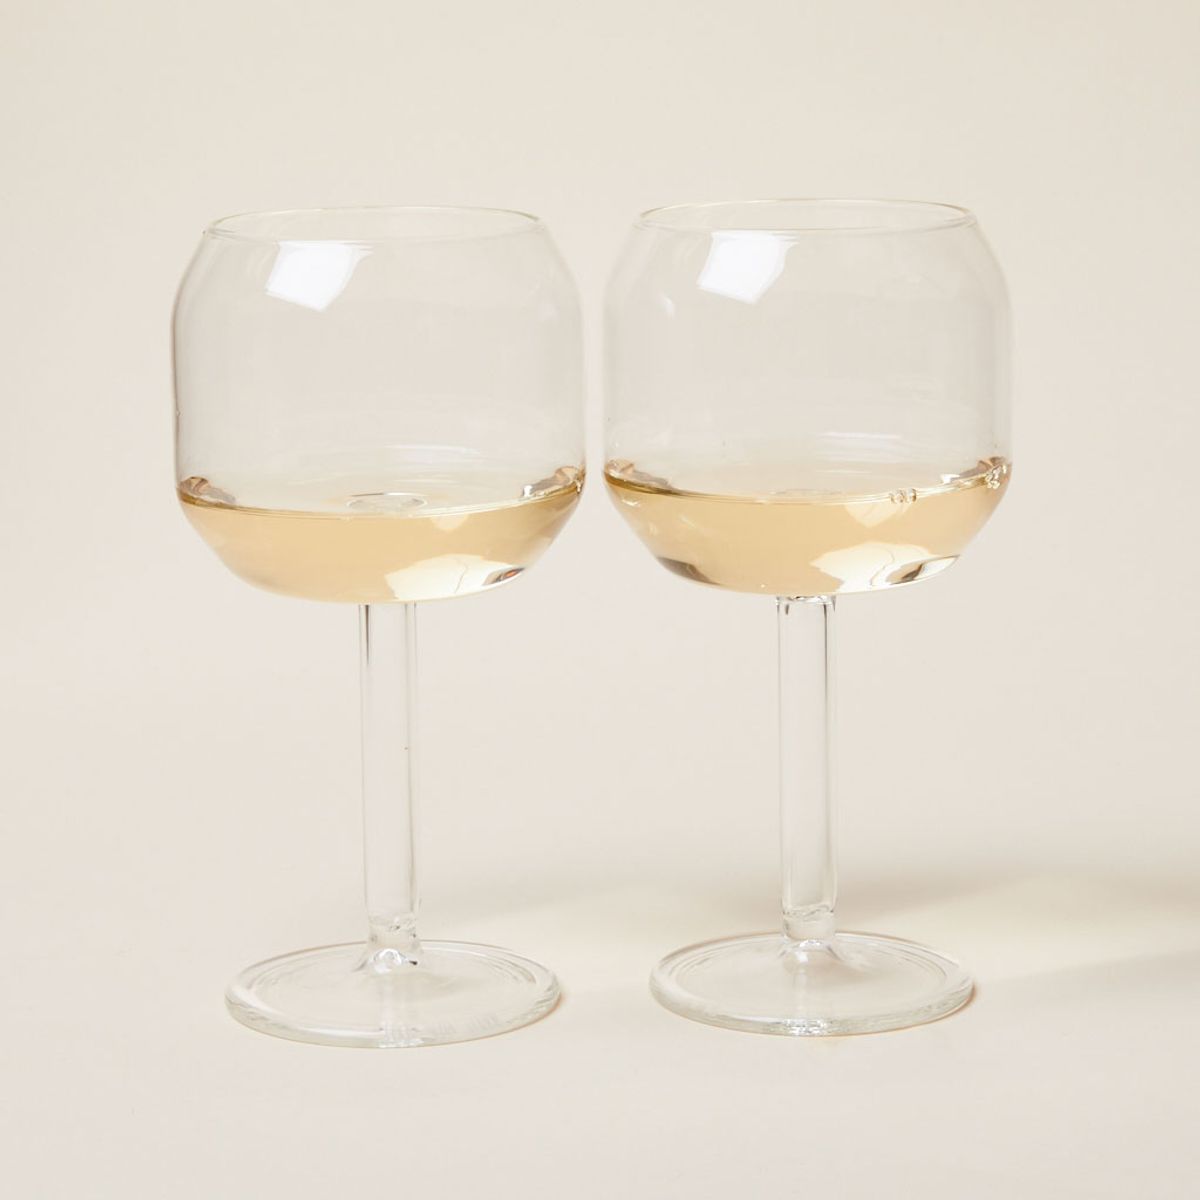 White wine partially fills two identical Velasca calices: stemmed wine glasses with large, tall bowls